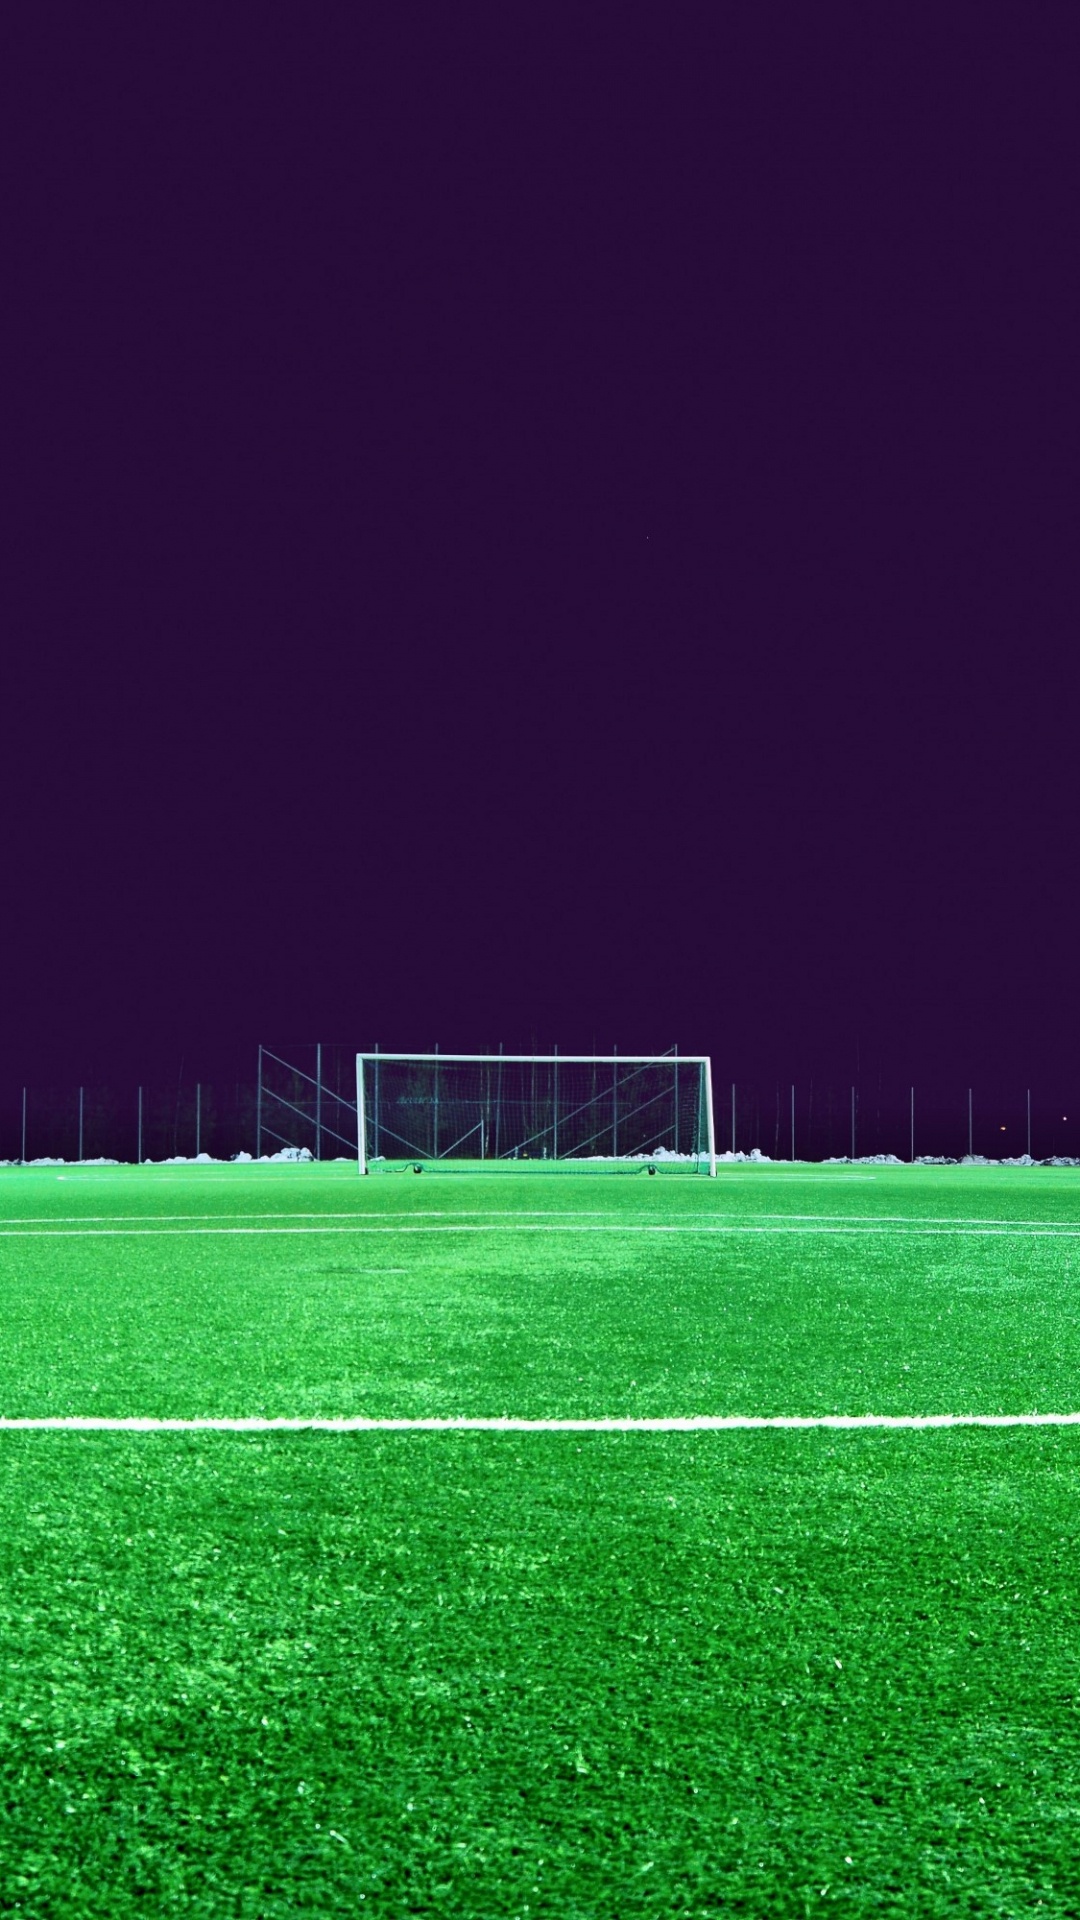 Soccer Goal Net on Green Field During Night Time. Wallpaper in 1080x1920 Resolution